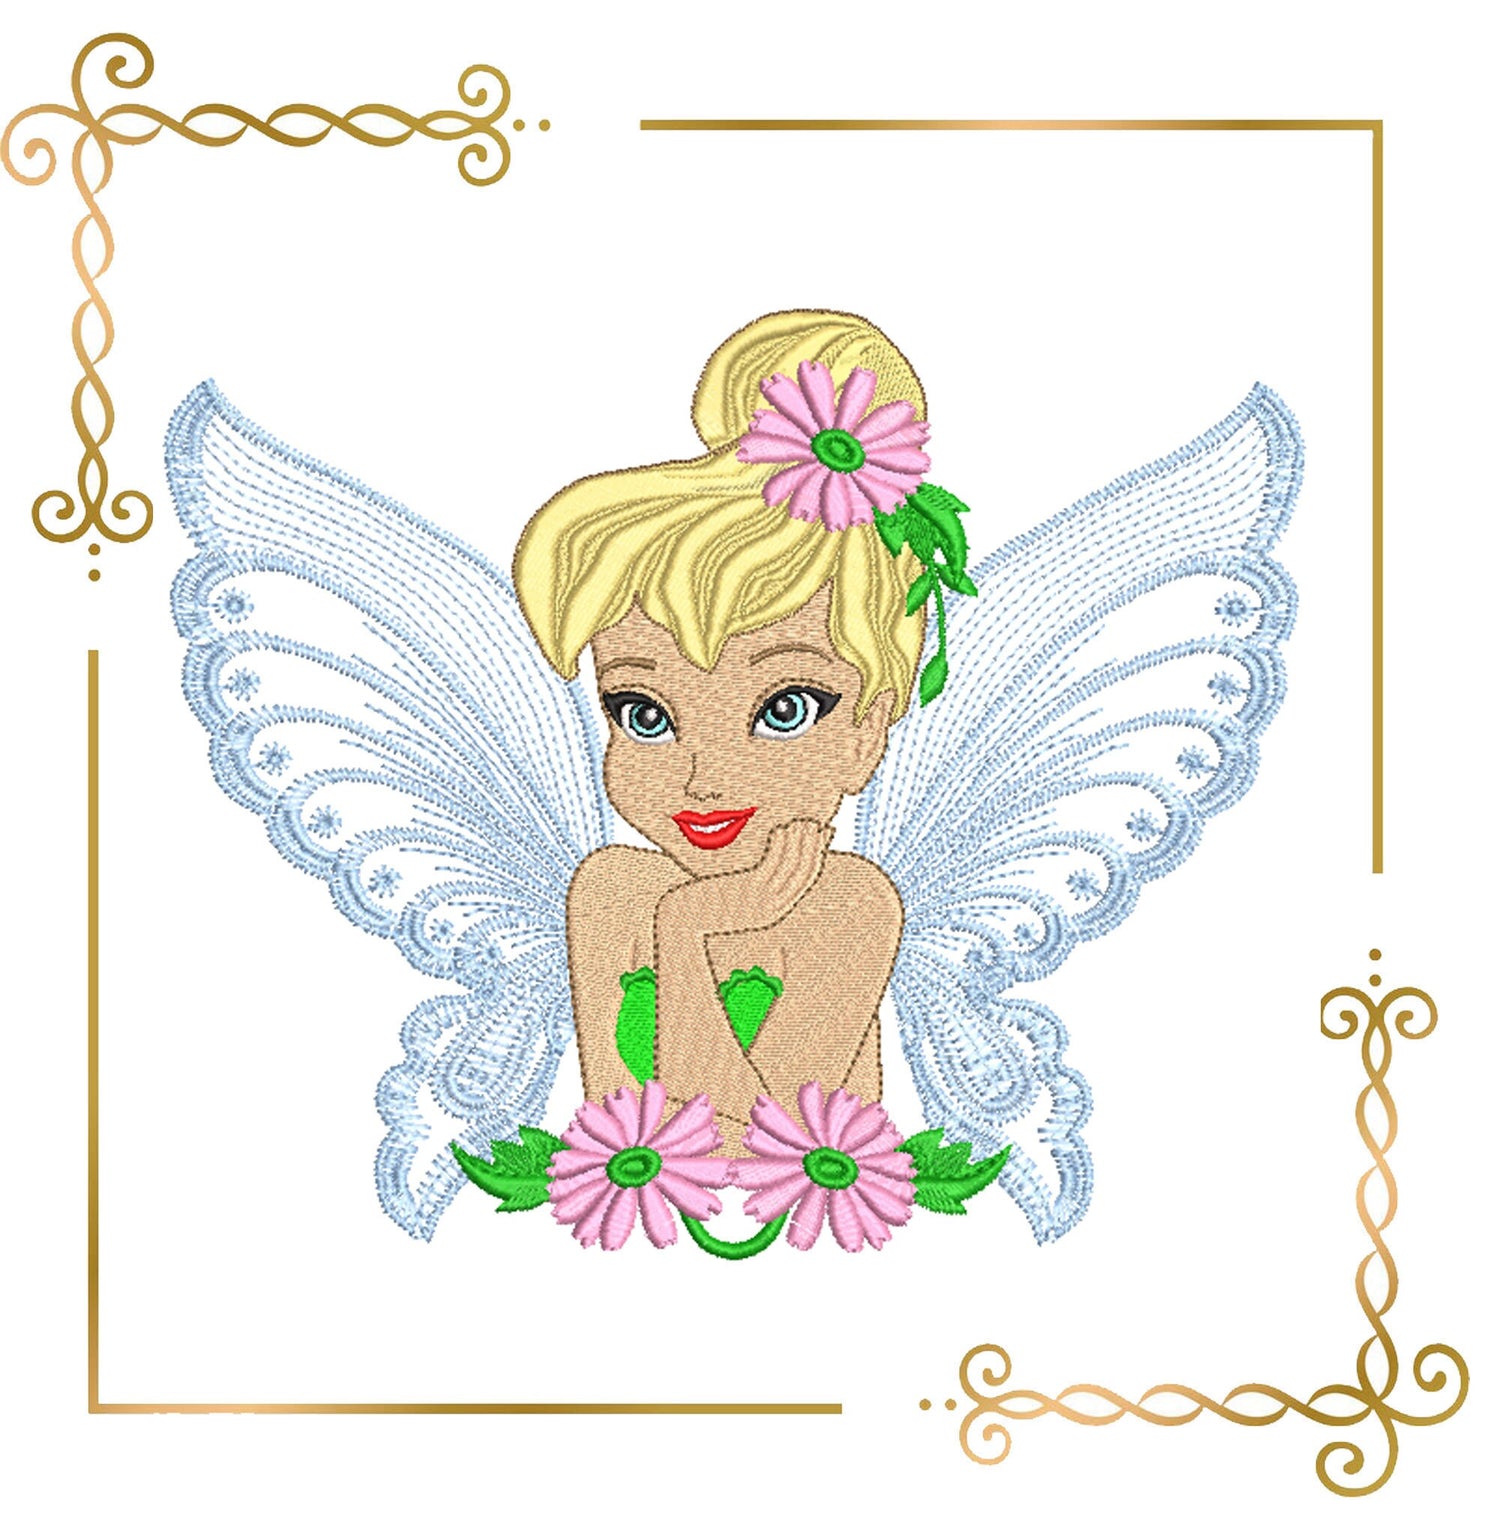 Princess Tinker Bell Disney Fabulous Fairy 3 sizes embroidery design to the direct download.